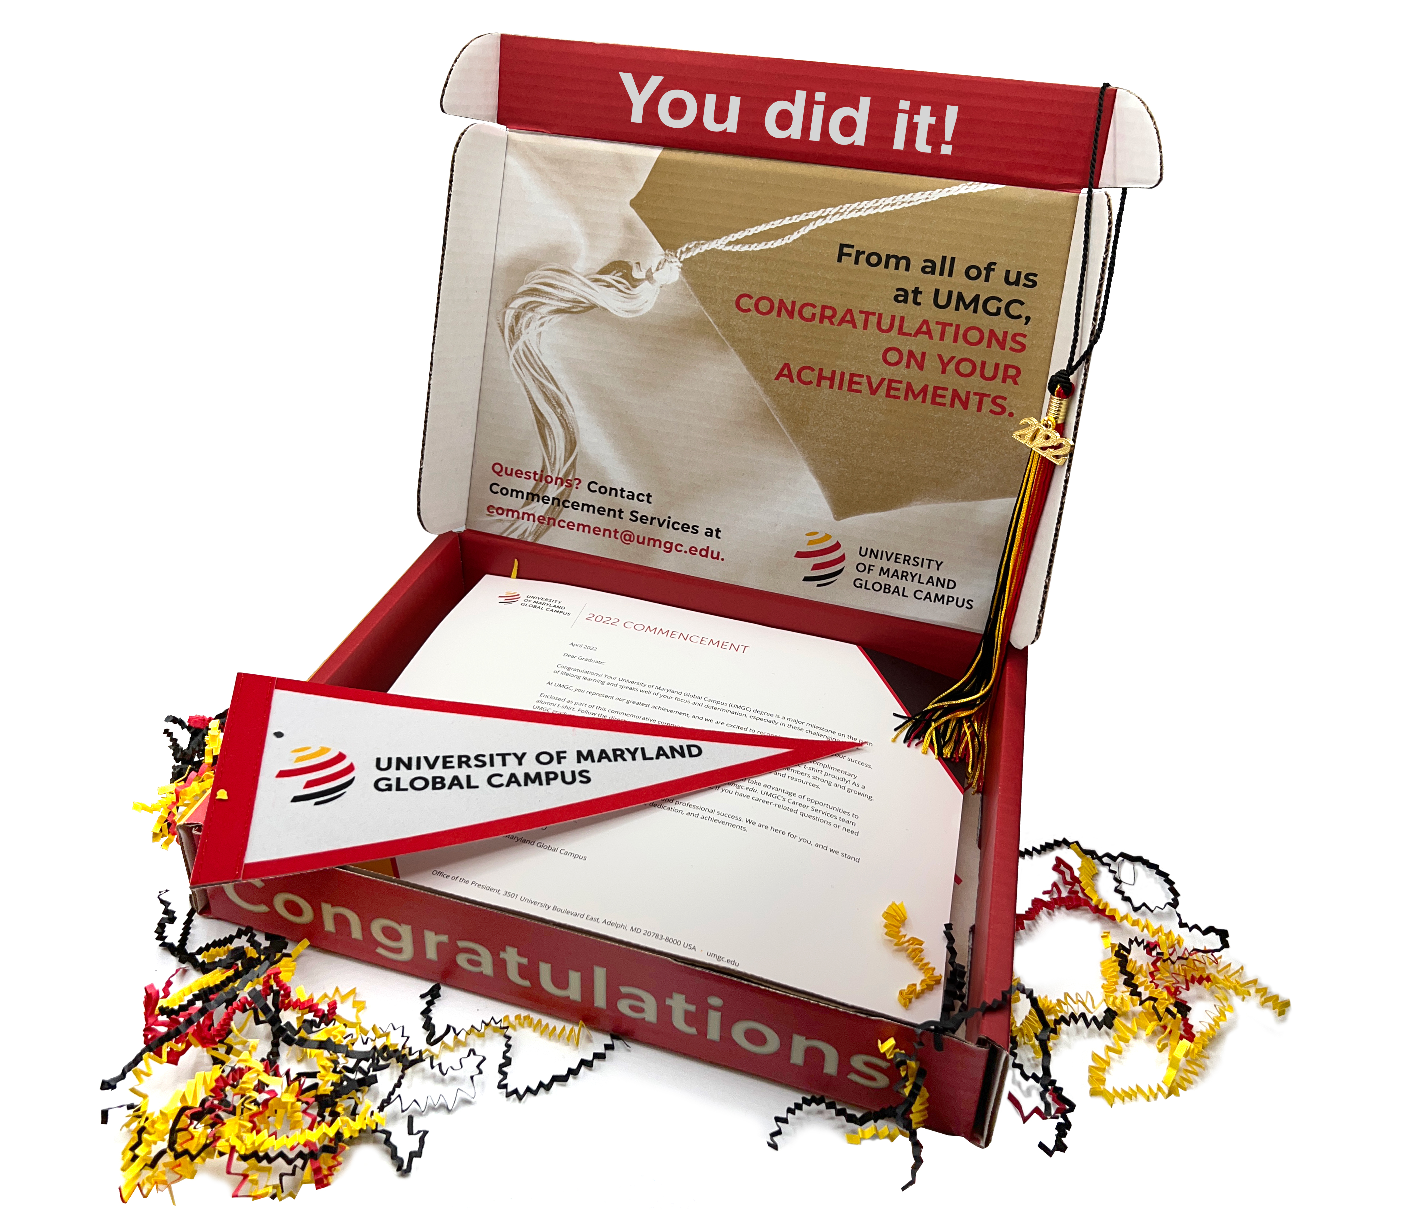 An open graduation-themed greeting card from the University of Maryland Global Campus with the message "You did it, graduate!" displayed on the mosaic-decorated card, surrounded by celebratory confetti.